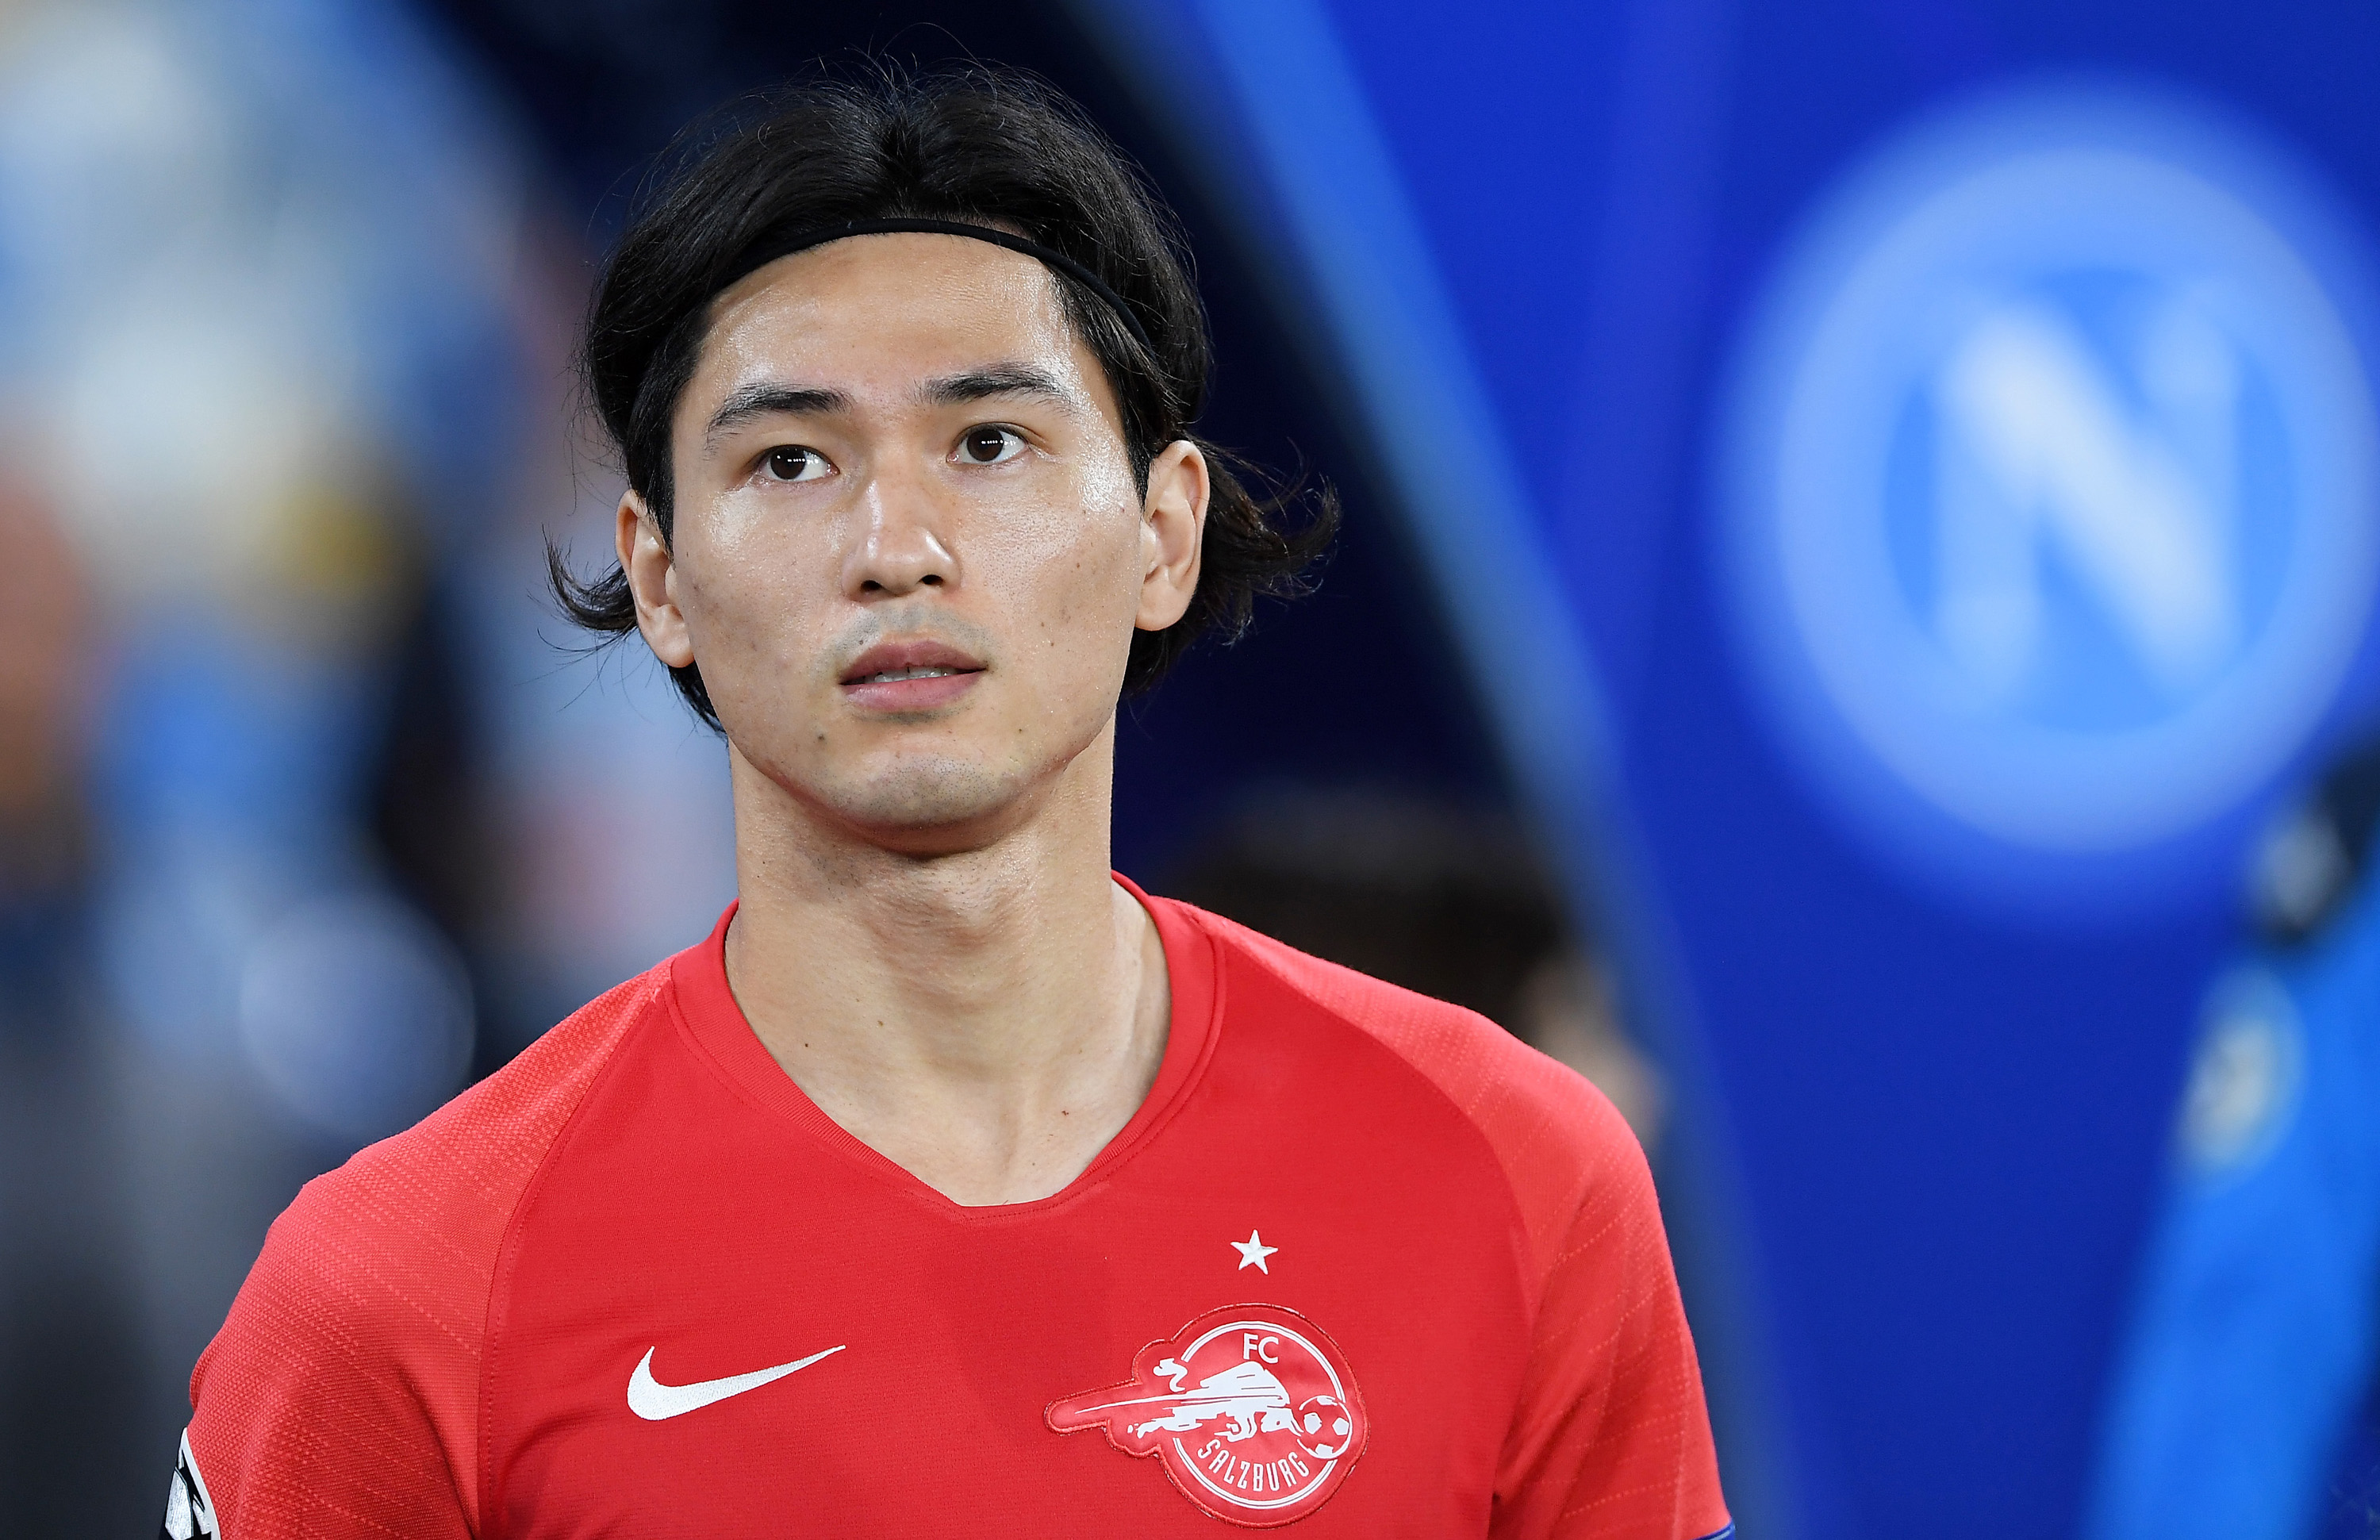 NAPLES, ITALY - NOVEMBER 05: Takumi Minamino of RB salzburg during the UEFA Champions League group E match between SSC Napoli and RB Salzburg at Stadio San Paolo on November 05, 2019 in Naples, Italy. (Photo by Francesco Pecoraro/Getty Images)